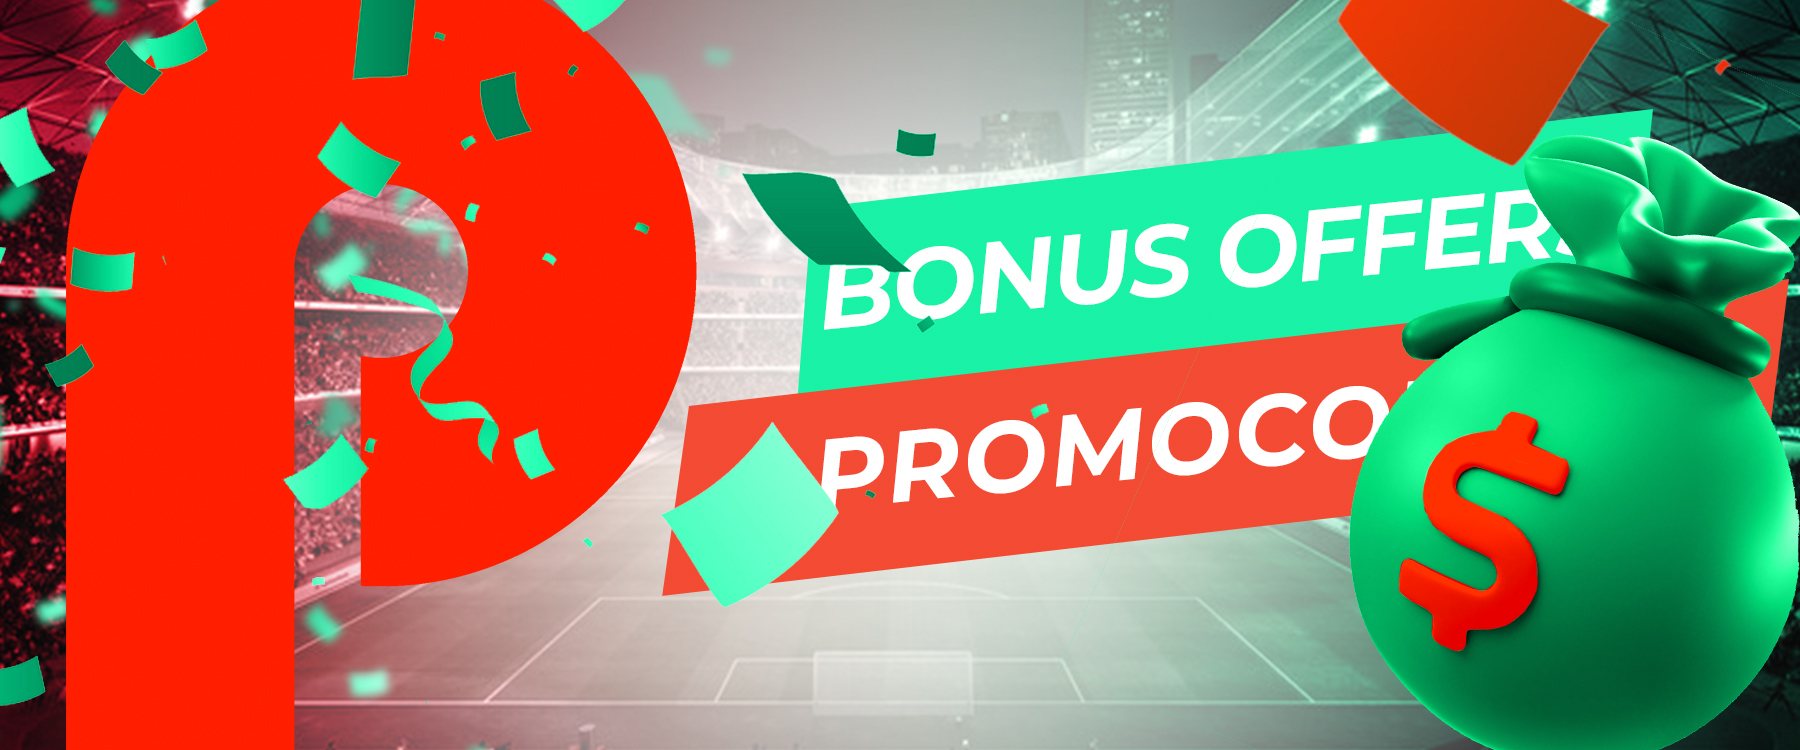 The most vivid bonus offers, promotions, promocodes that are available on PinUp.